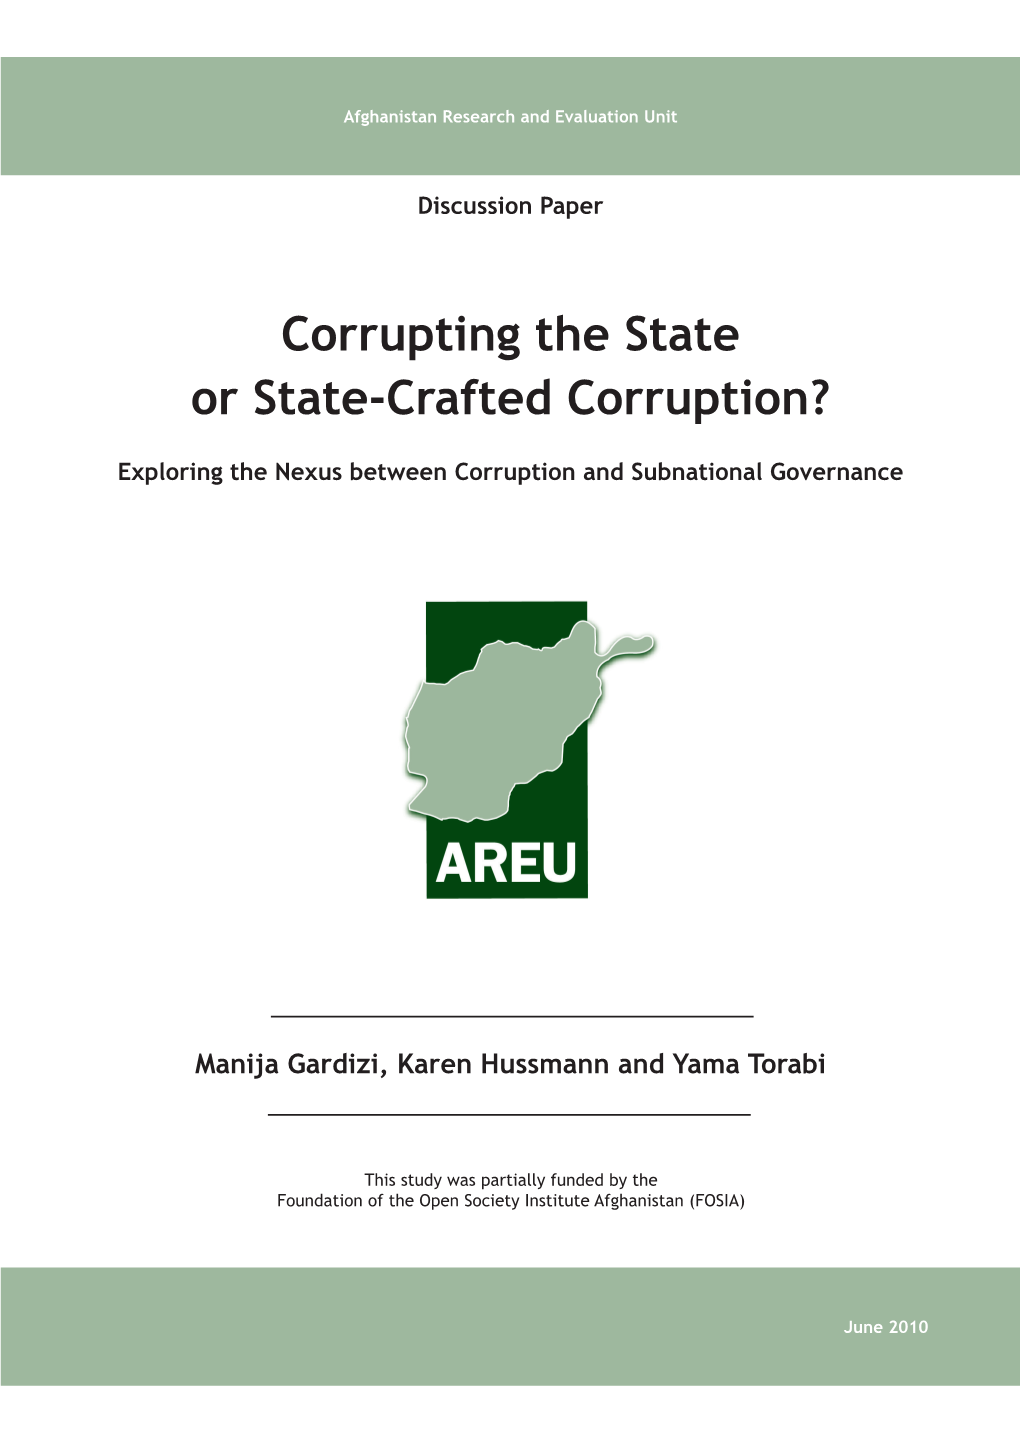 Corrupting the State Or State-Crafted Corruption?